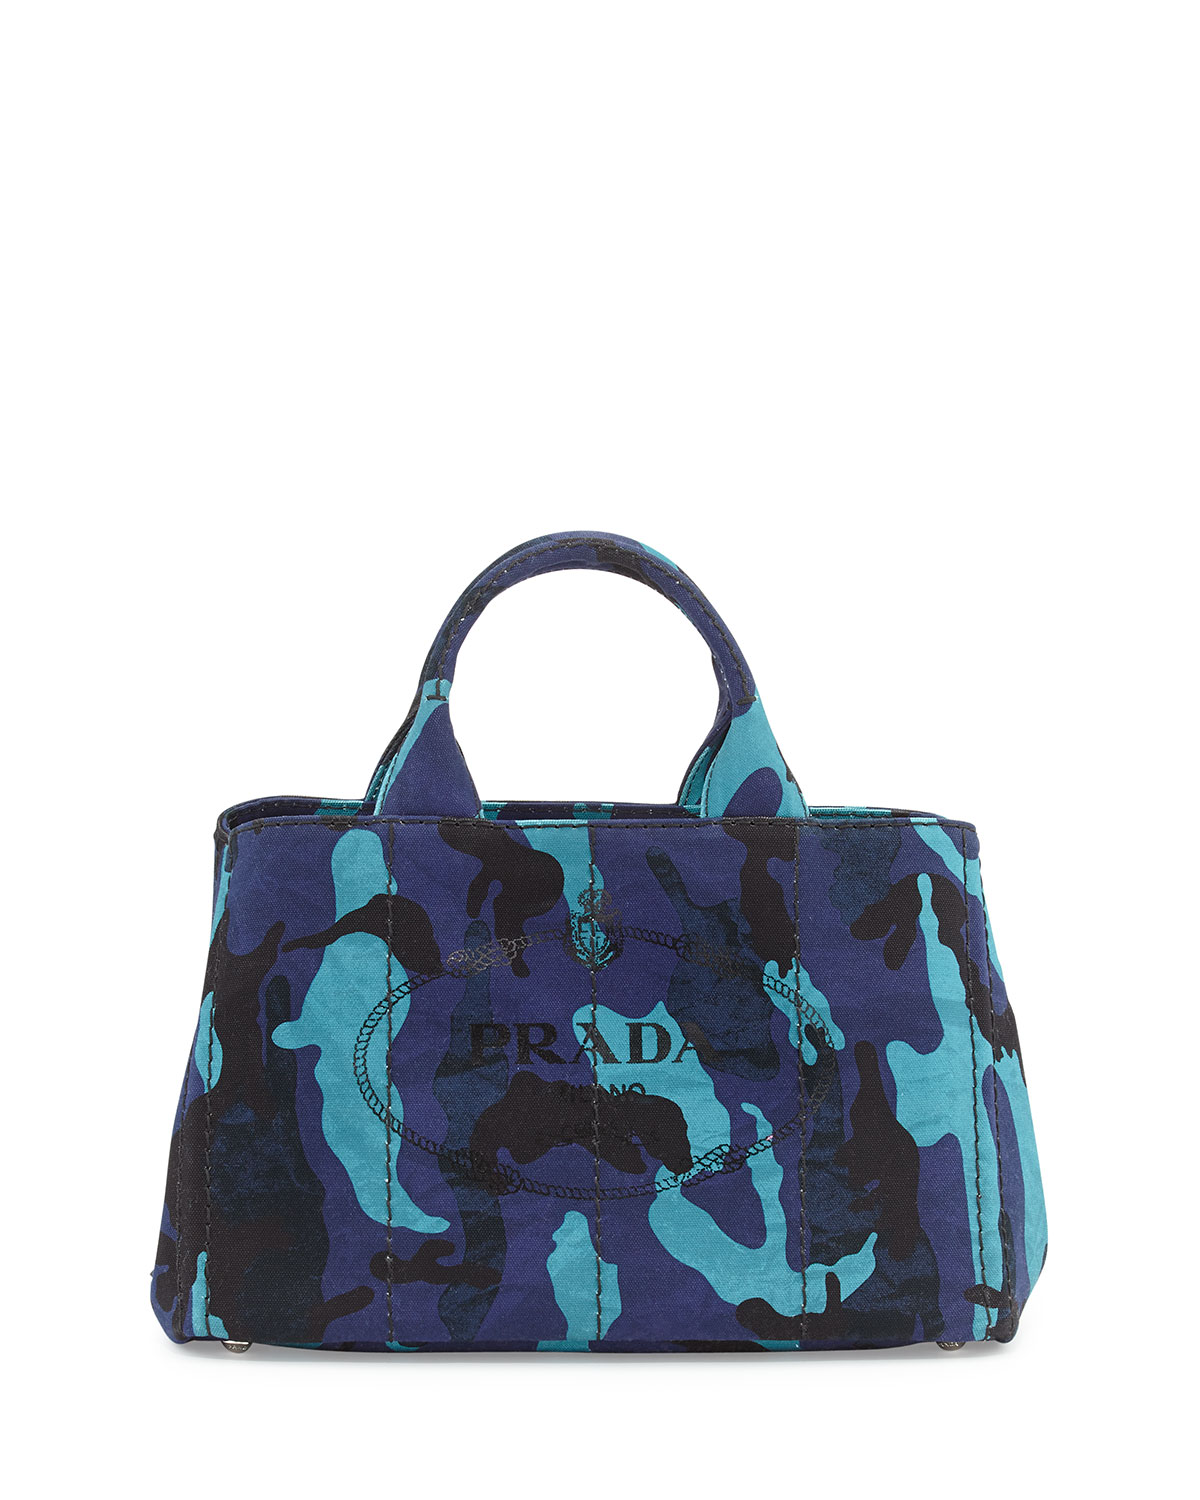 Prada Spring / Summer 2015 Bag Collection featuring Large ...  